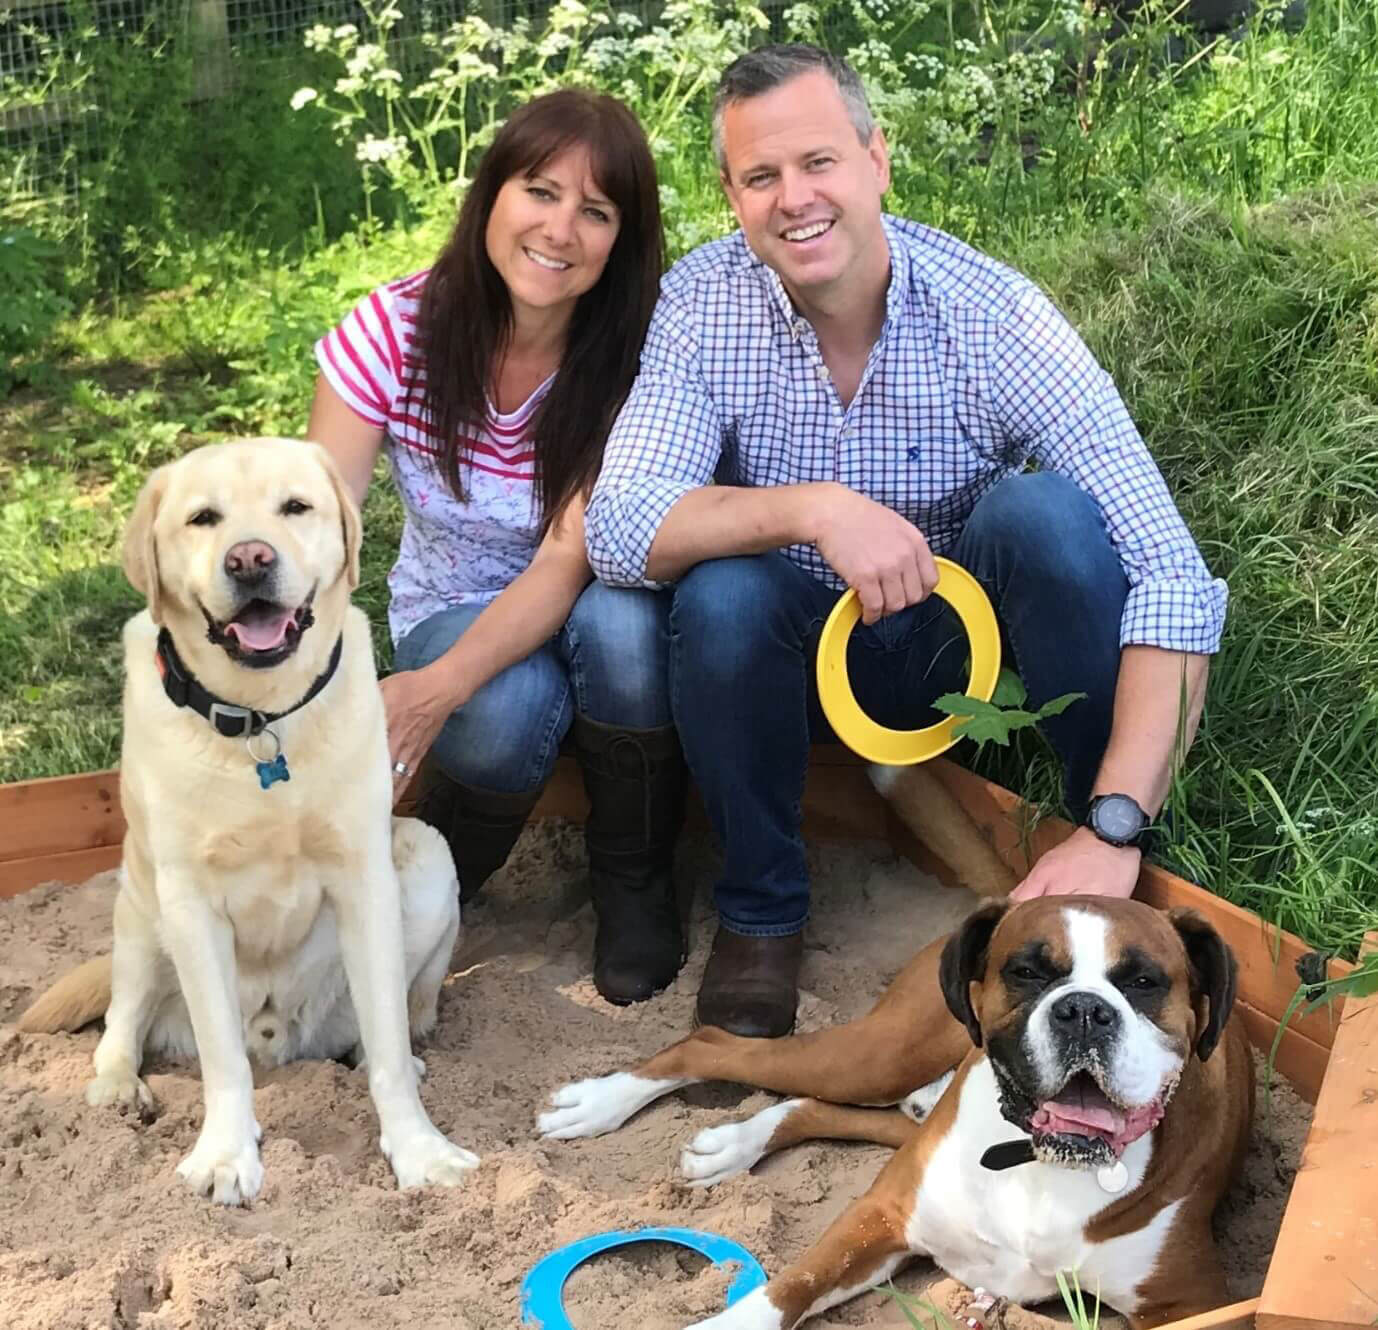 Photo of Scott, Karen and dogs at the Green Meadow Dog Day Care site